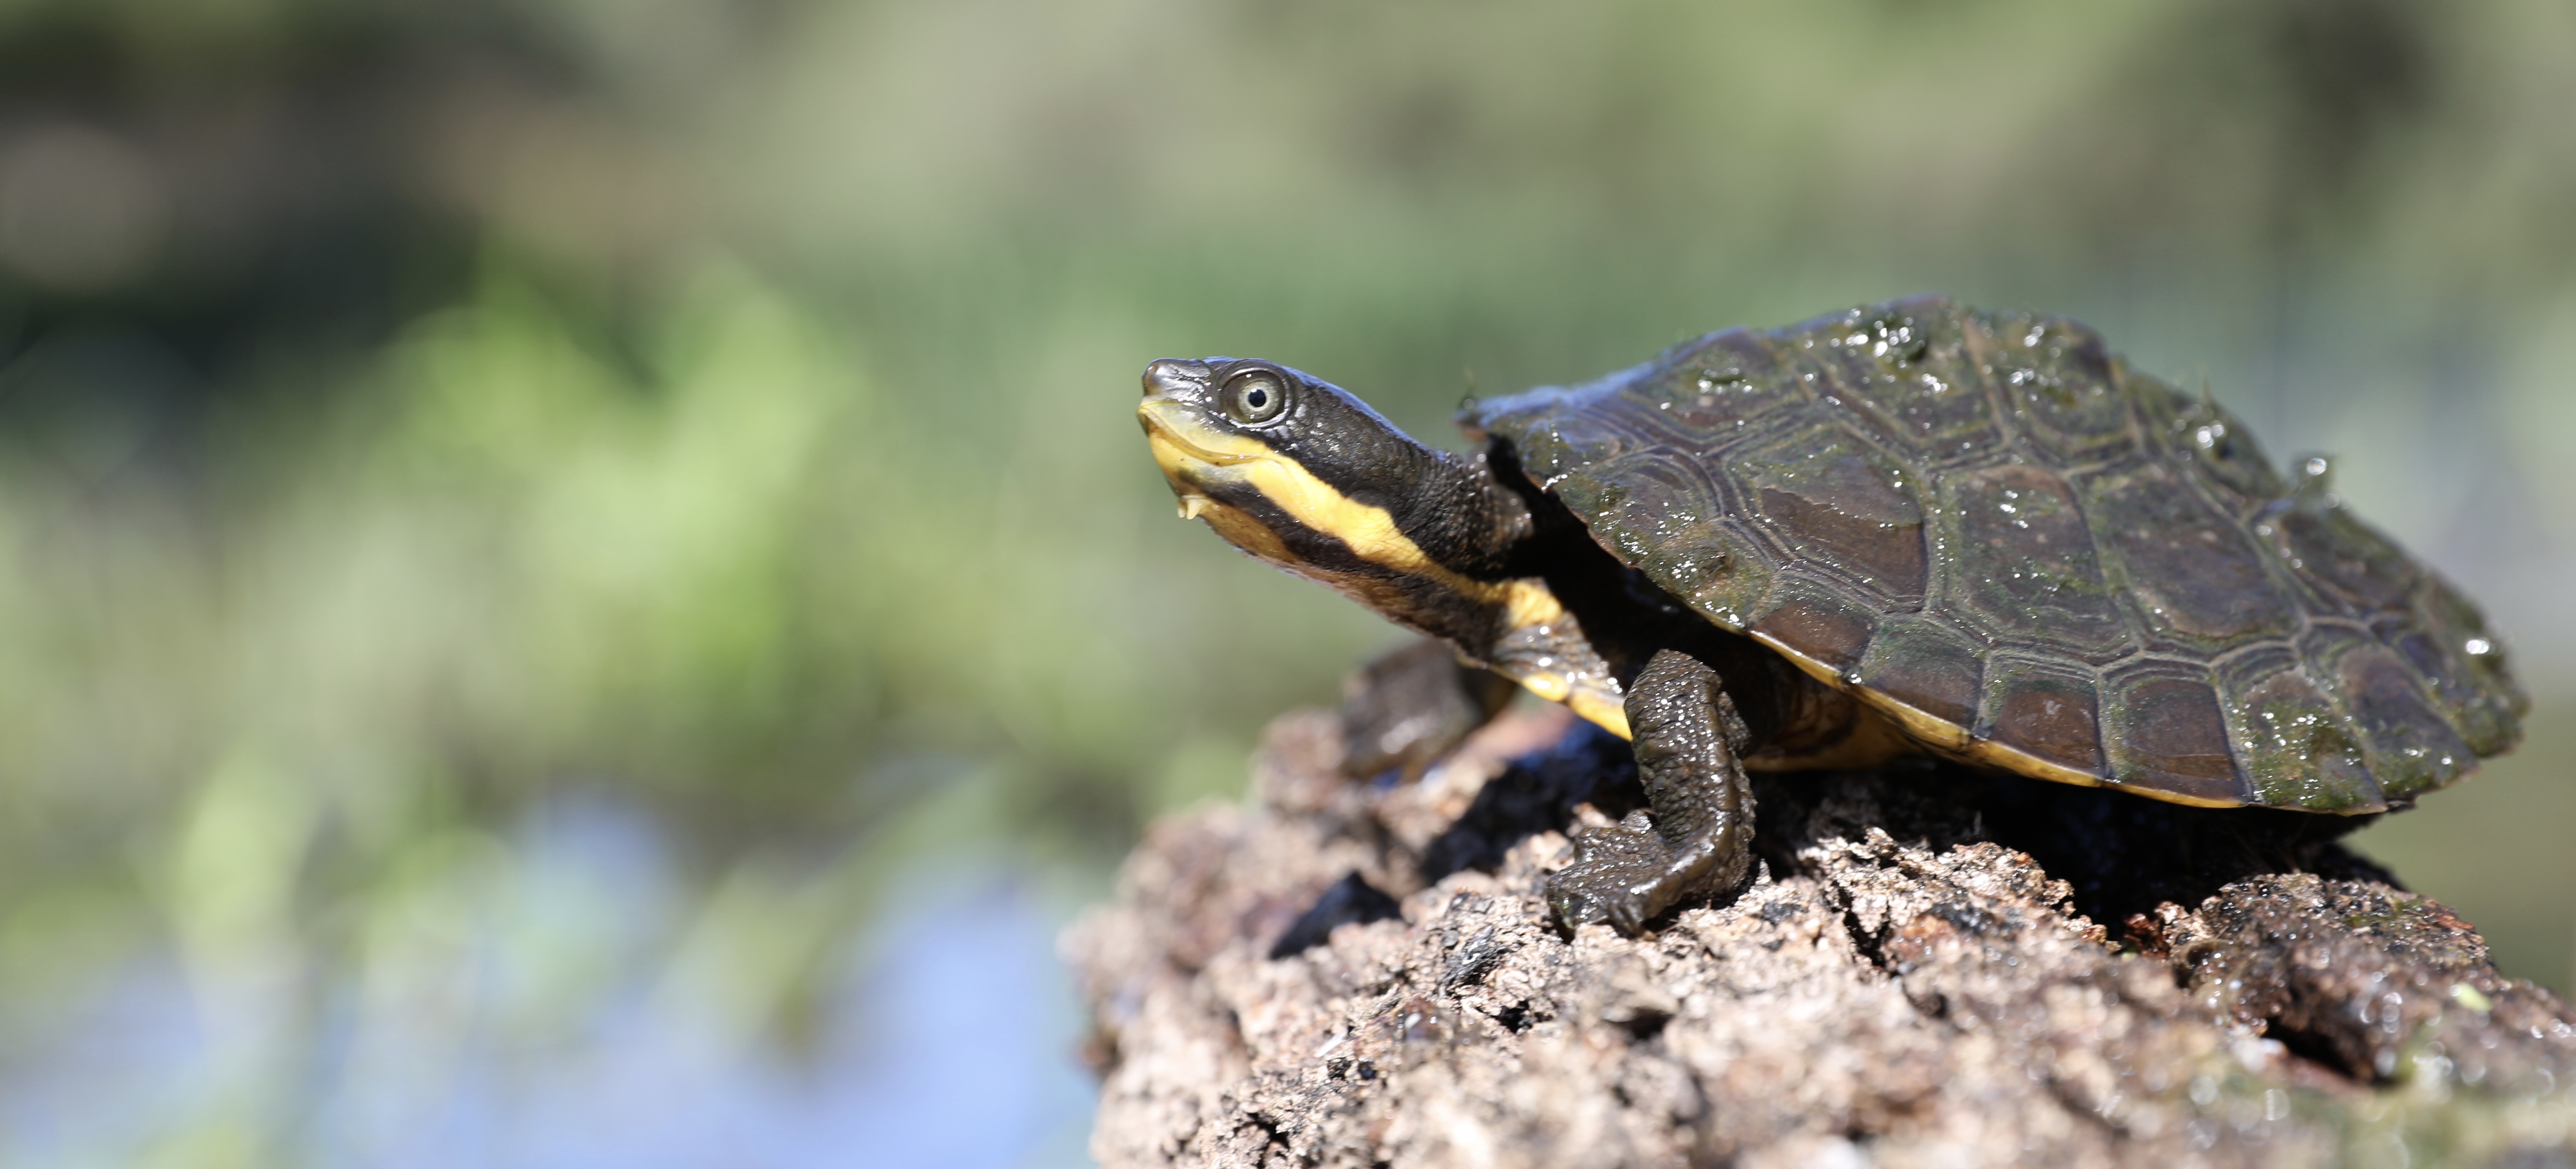 Endangered Manning River helmeted turtle thriving in some areas — and dingoes are helping